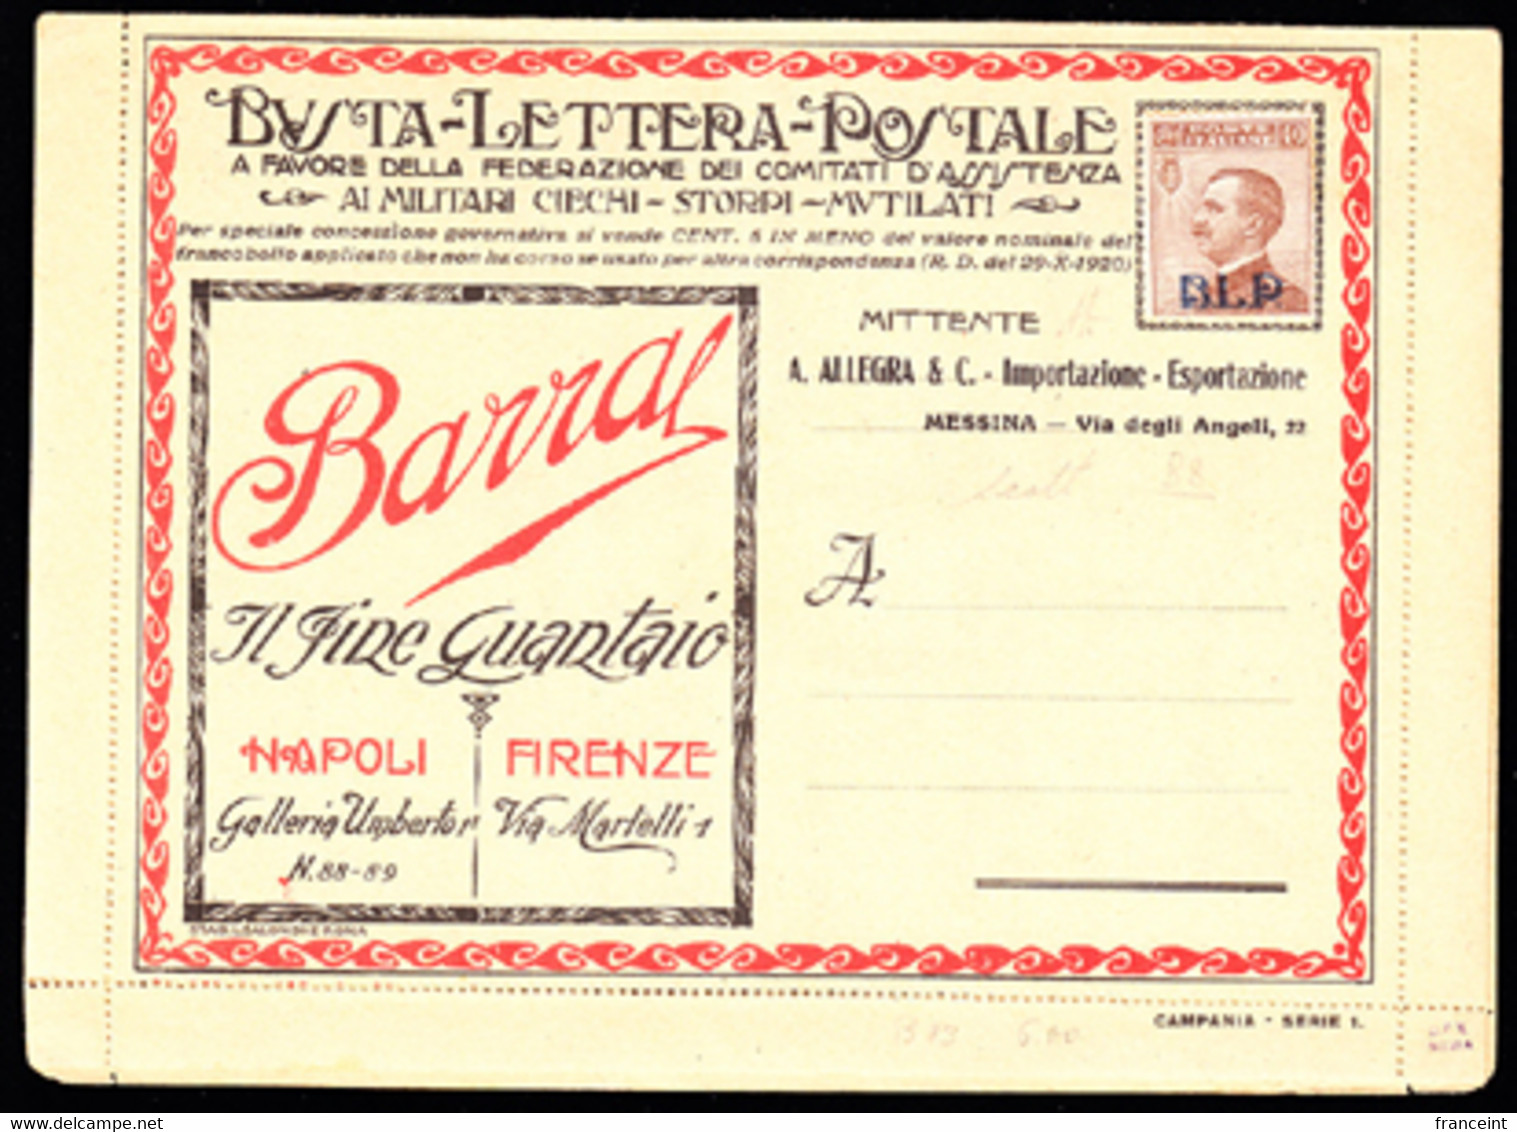 ITALY(1923) BLP Letter. Gloves. Electric Lighting & Heating. Silver And Nickel Plating. Restaurant. Weddings. Etc - Francobolli Per Buste Pubblicitarie (BLP)